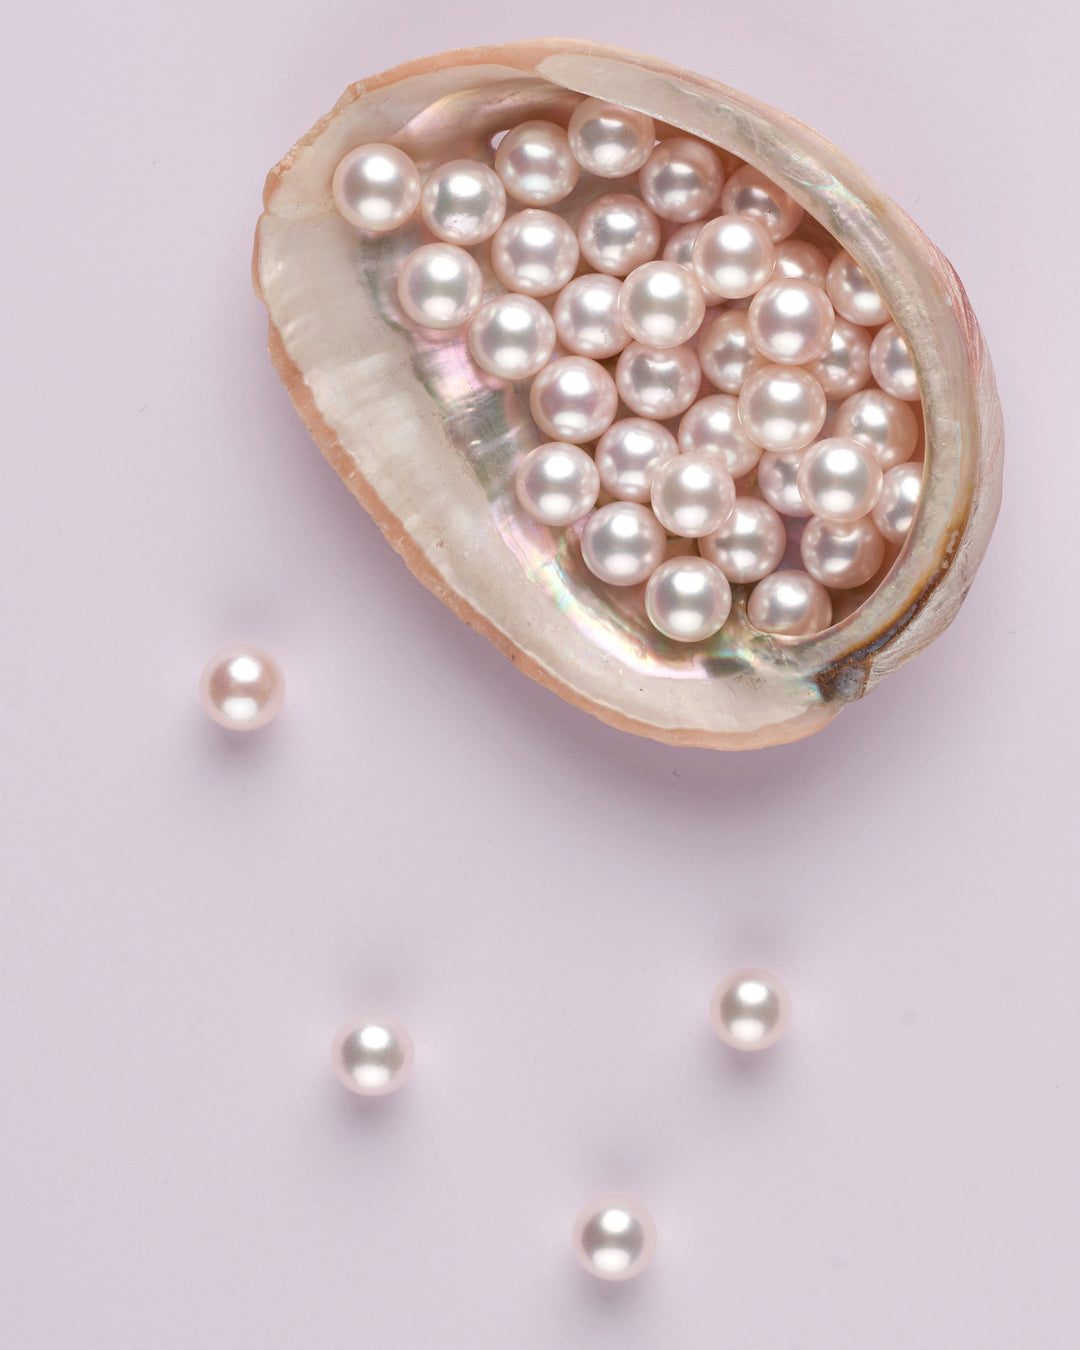 Loose, lustrous akoya pearls in oyster shell